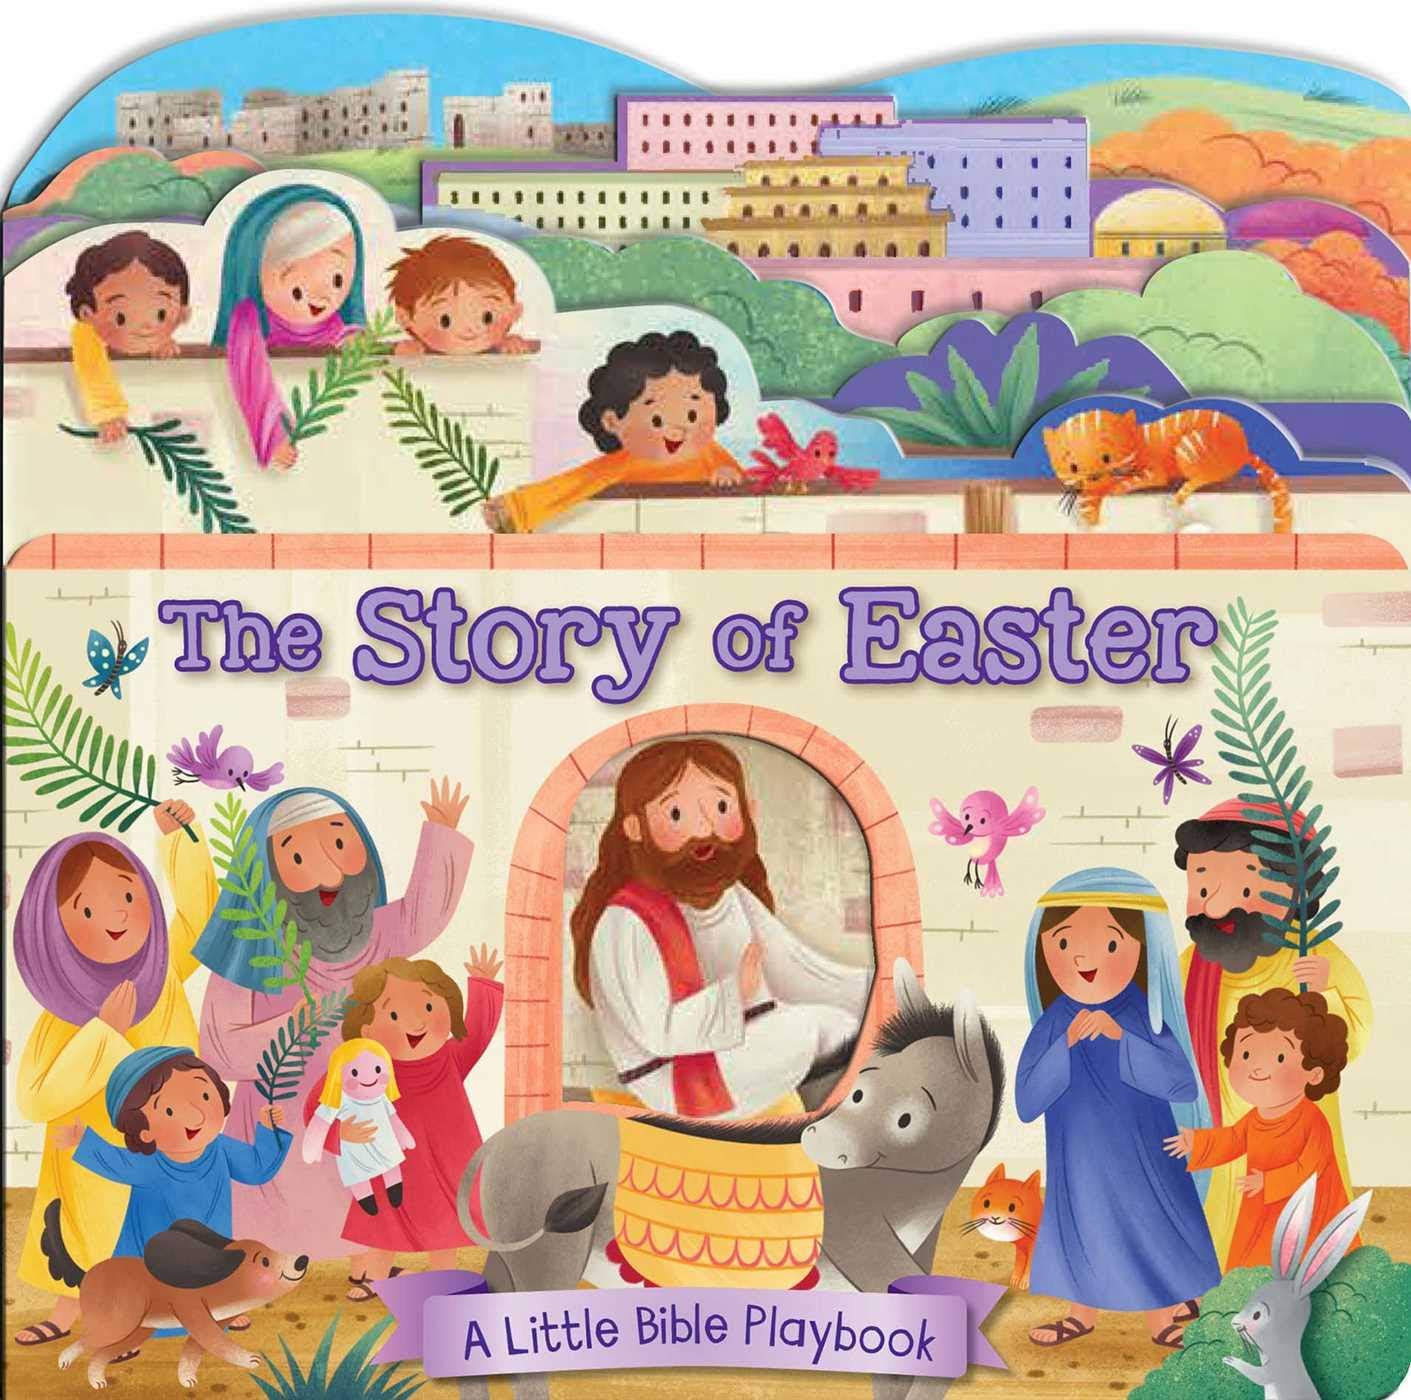 Little Bible Playbook: The Story of Easter [Book]